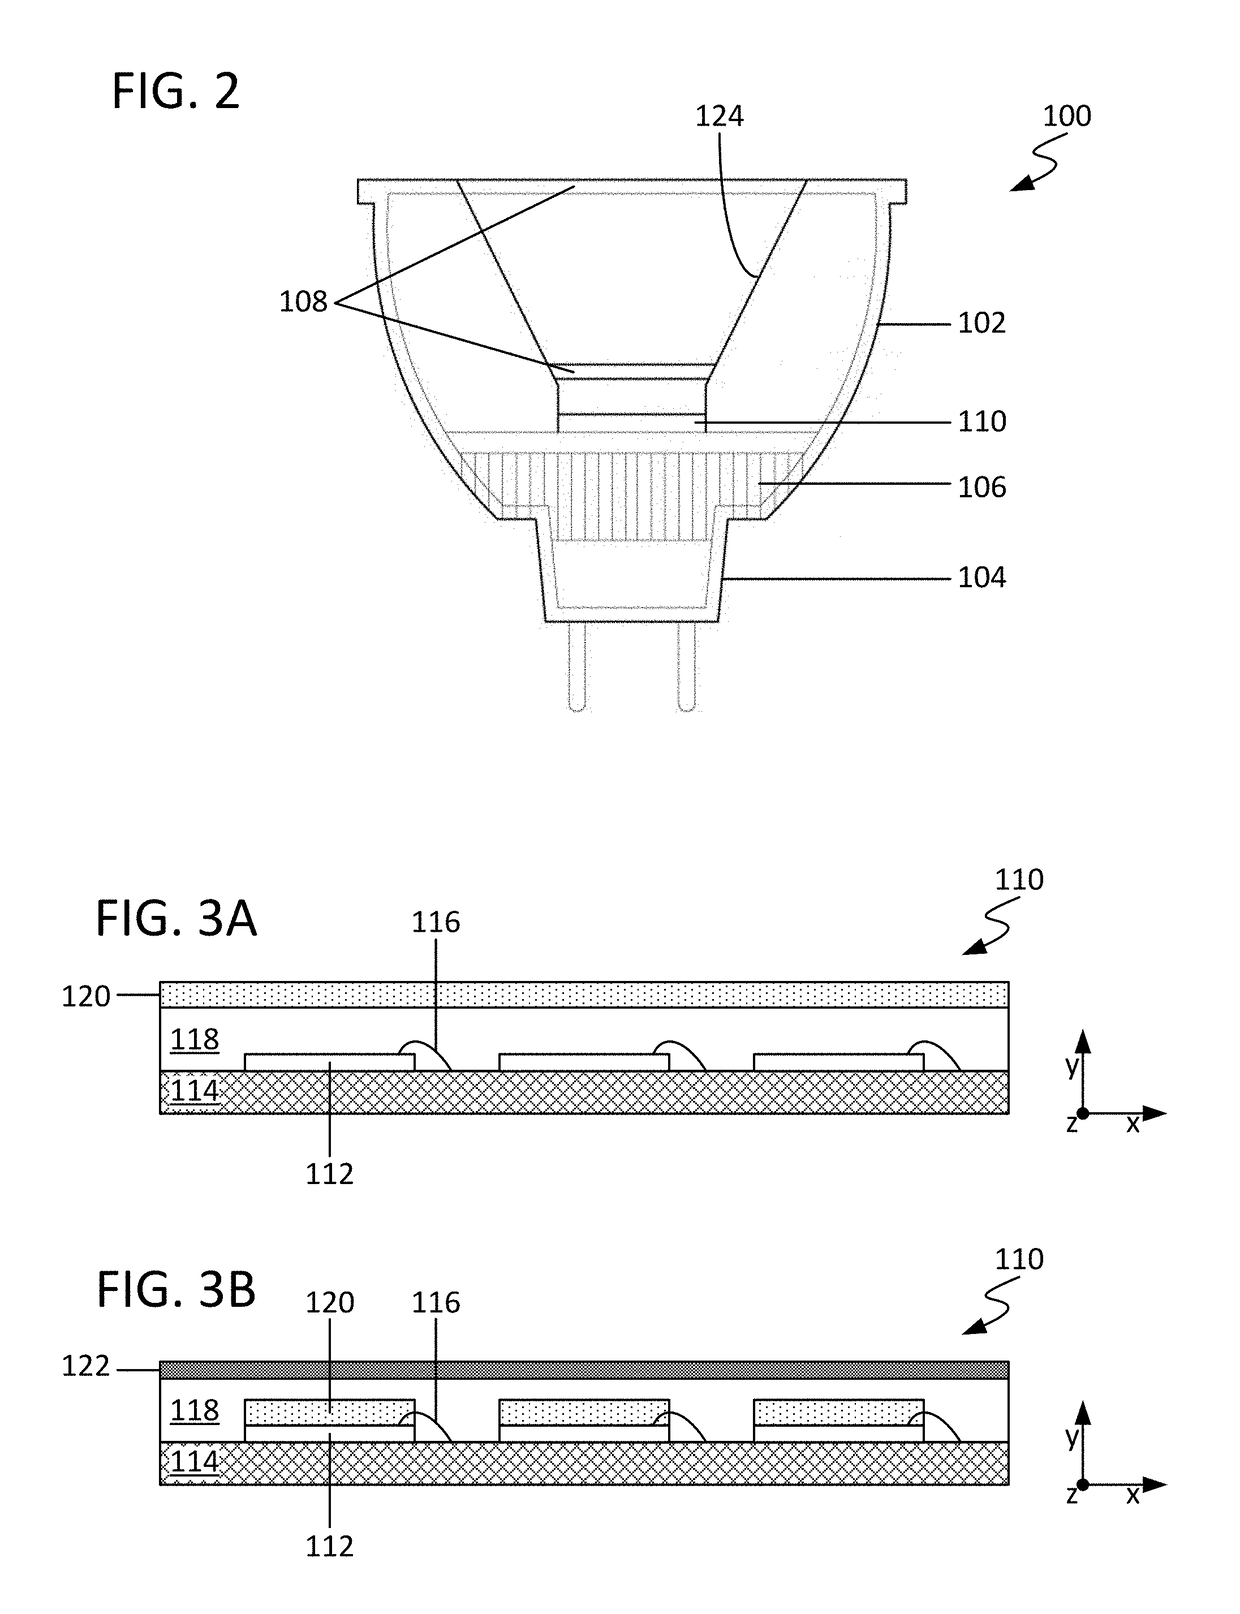 Solid state lighting device with electronically adjustable light beam distribution